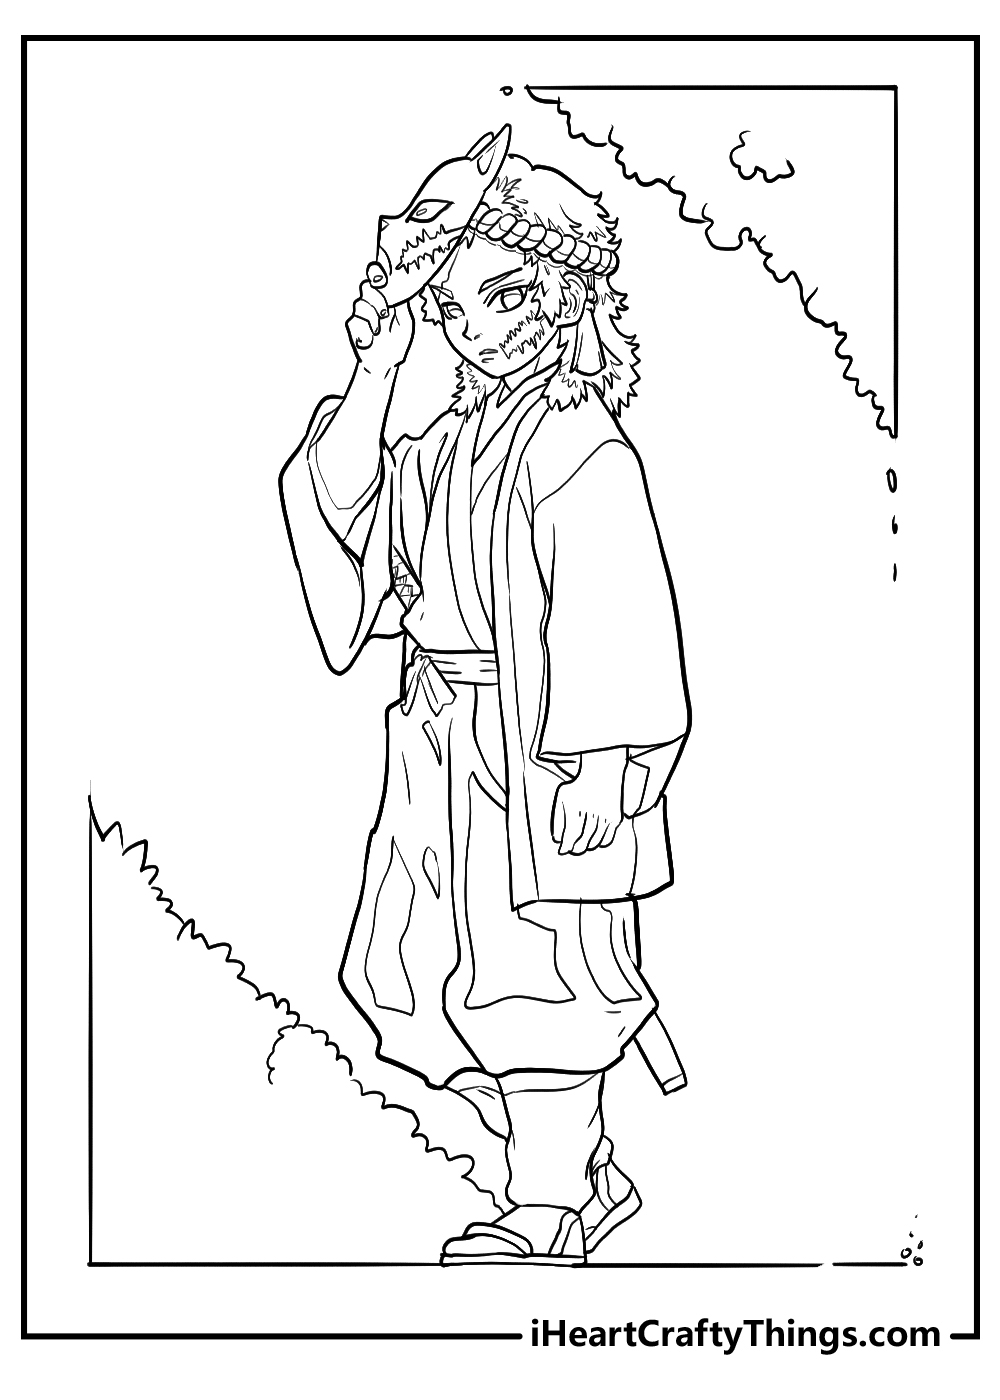 Demon Slayer Coloring Pages - Free Printable Coloring Pages for Kids